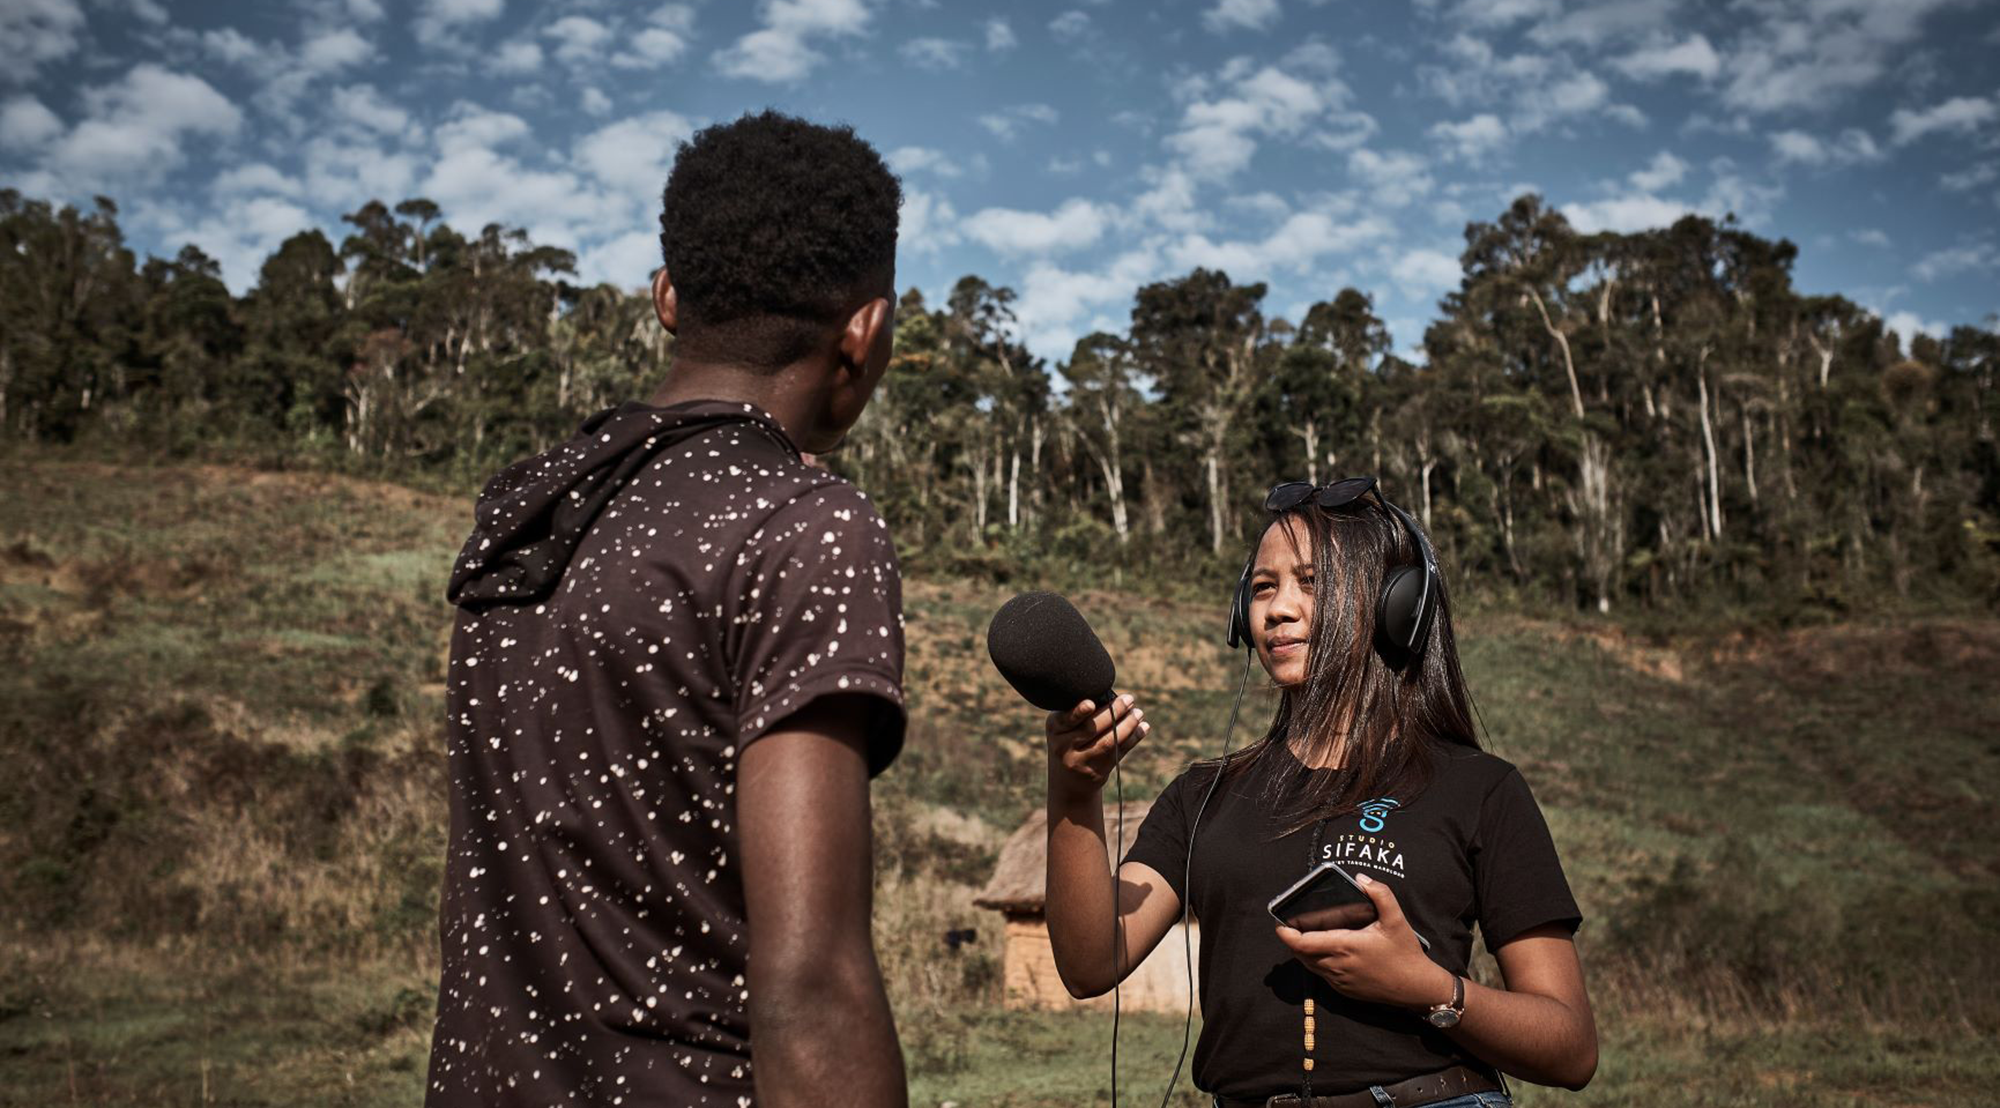 Studio Sifaka – a radio program giving voice to youth in Madagascar